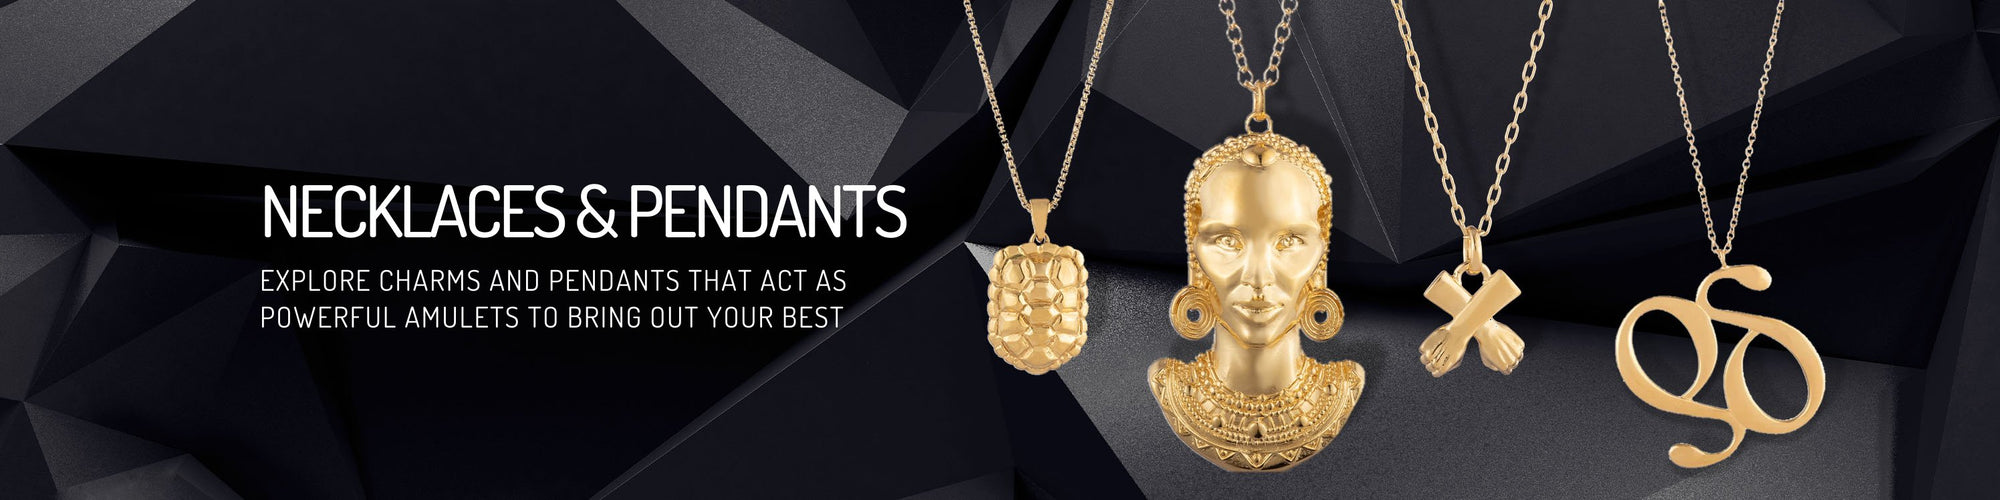 Dalasini: explore charms and pendants that act as powerful amulets to bring out your best